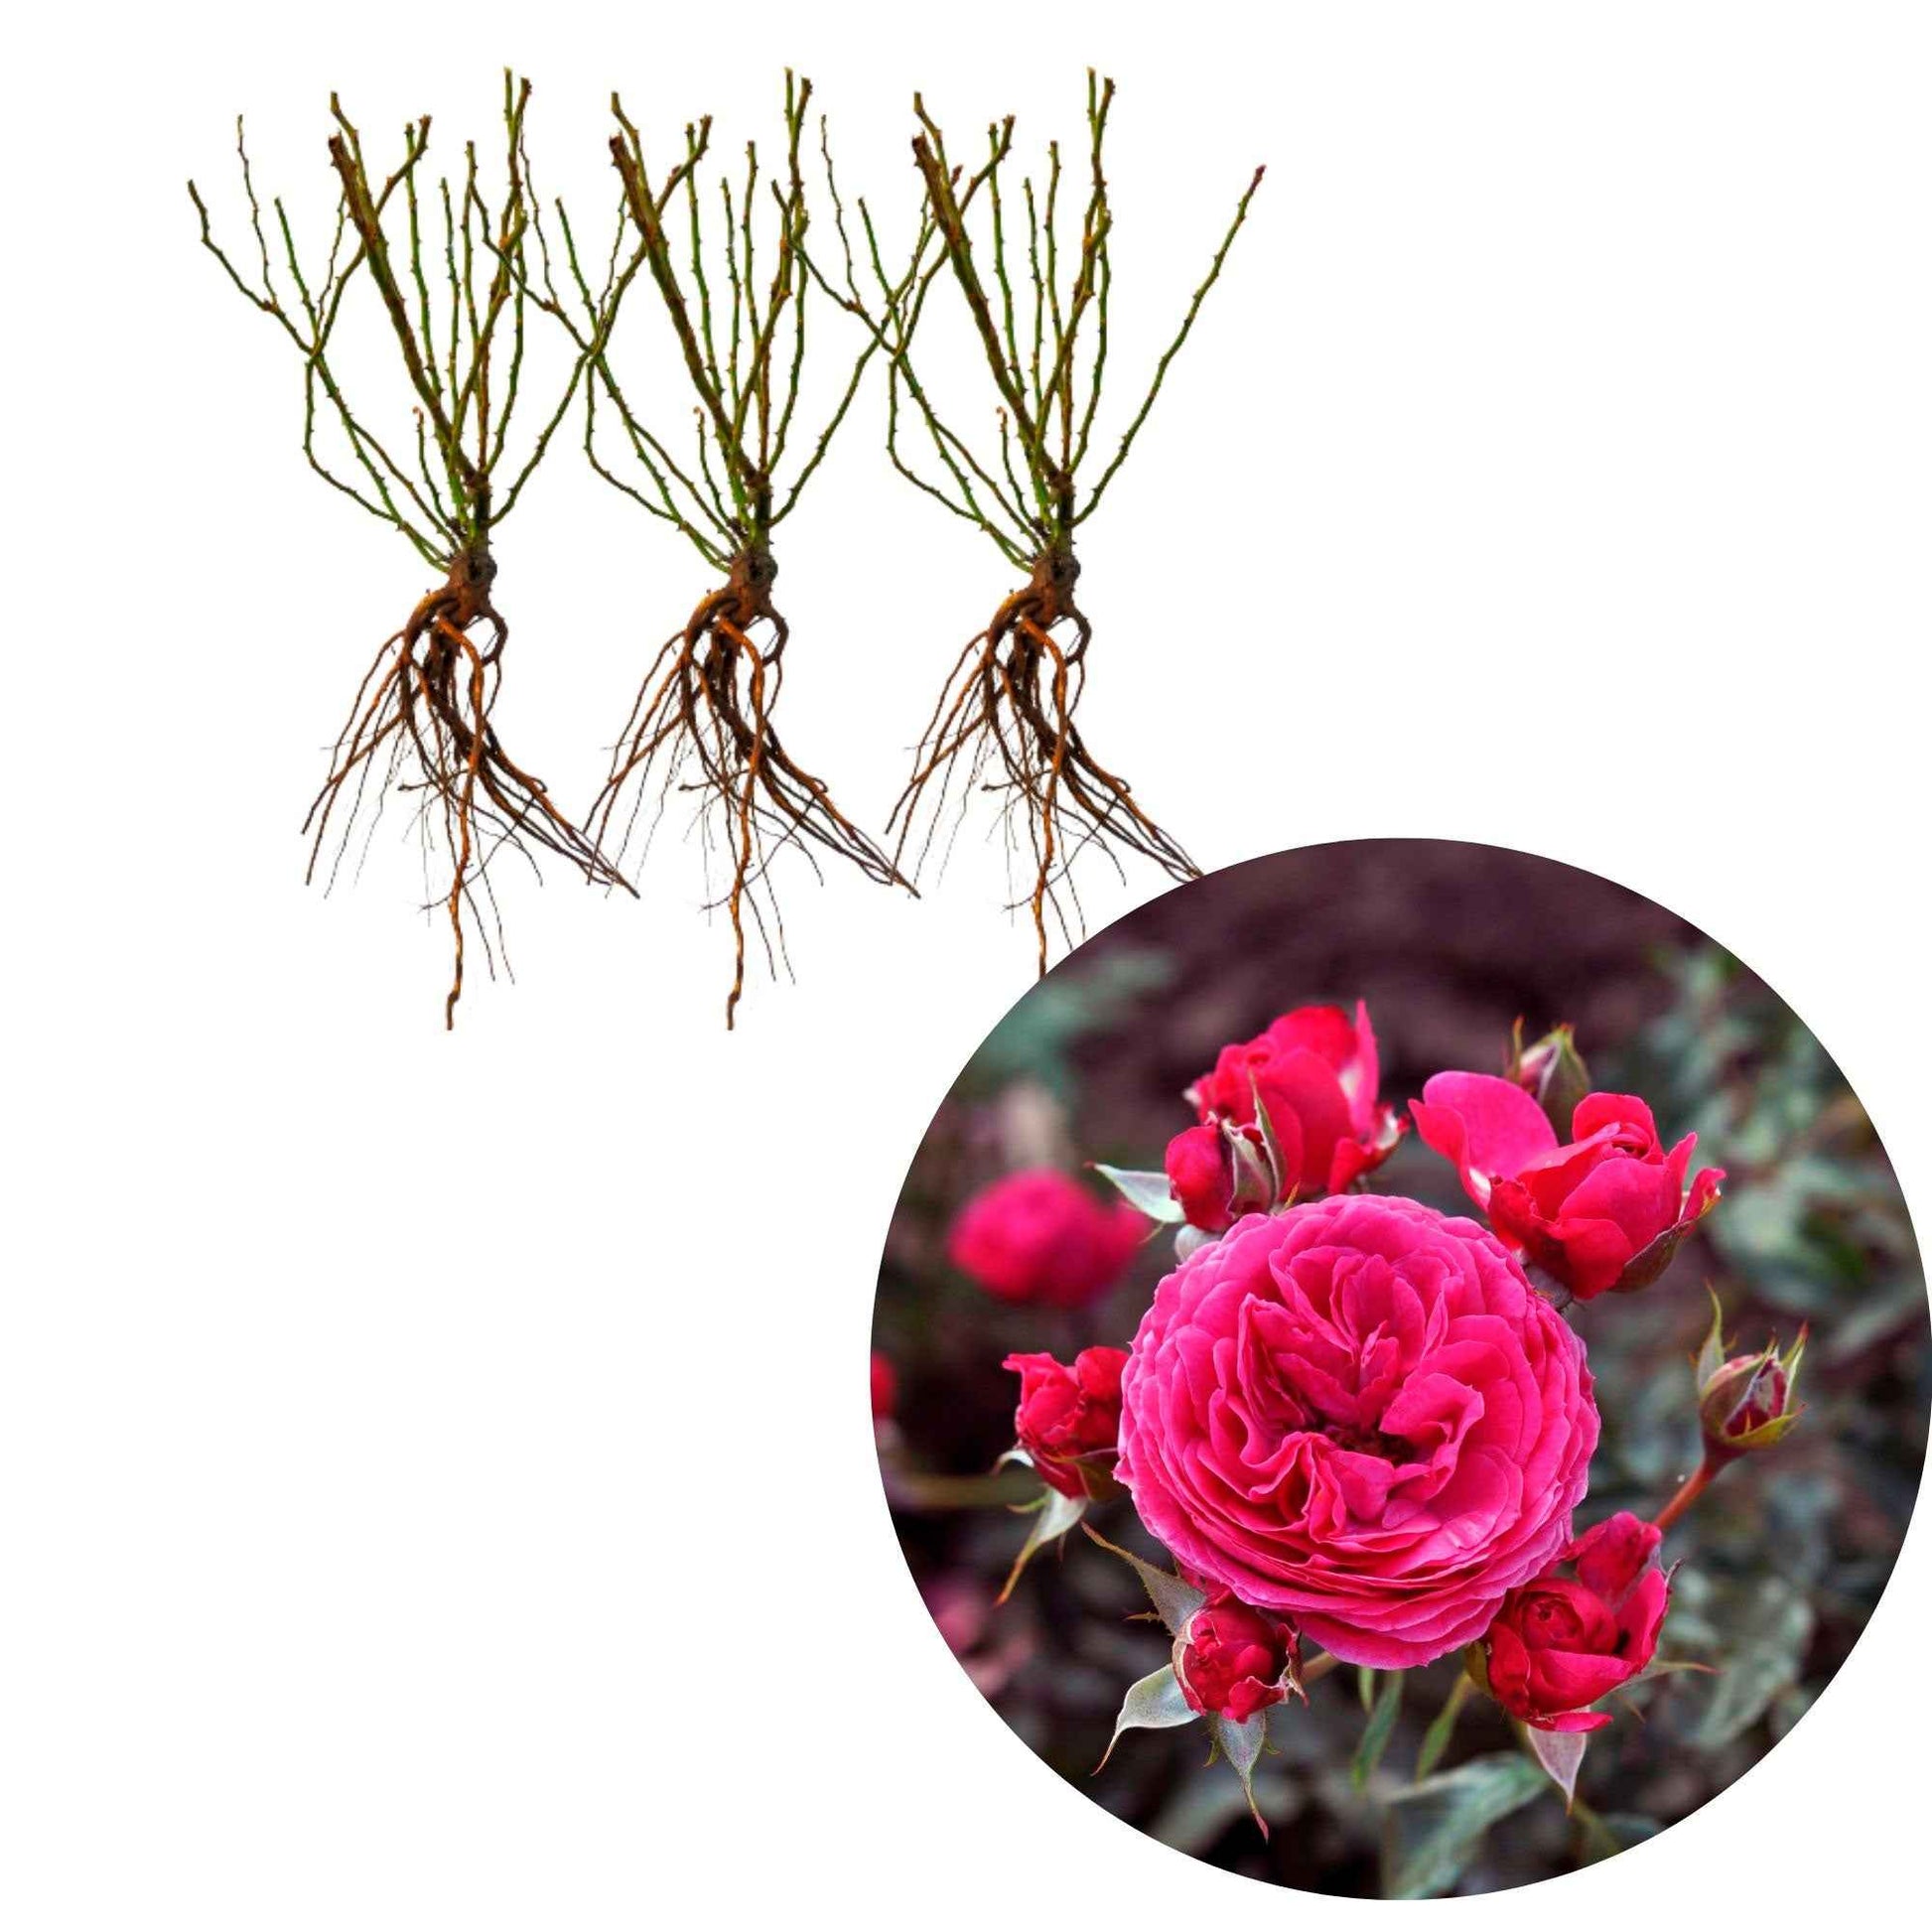 3x Roos Rosa 'Dolce'® Roze  - Bare rooted - Winterhard - Rozen